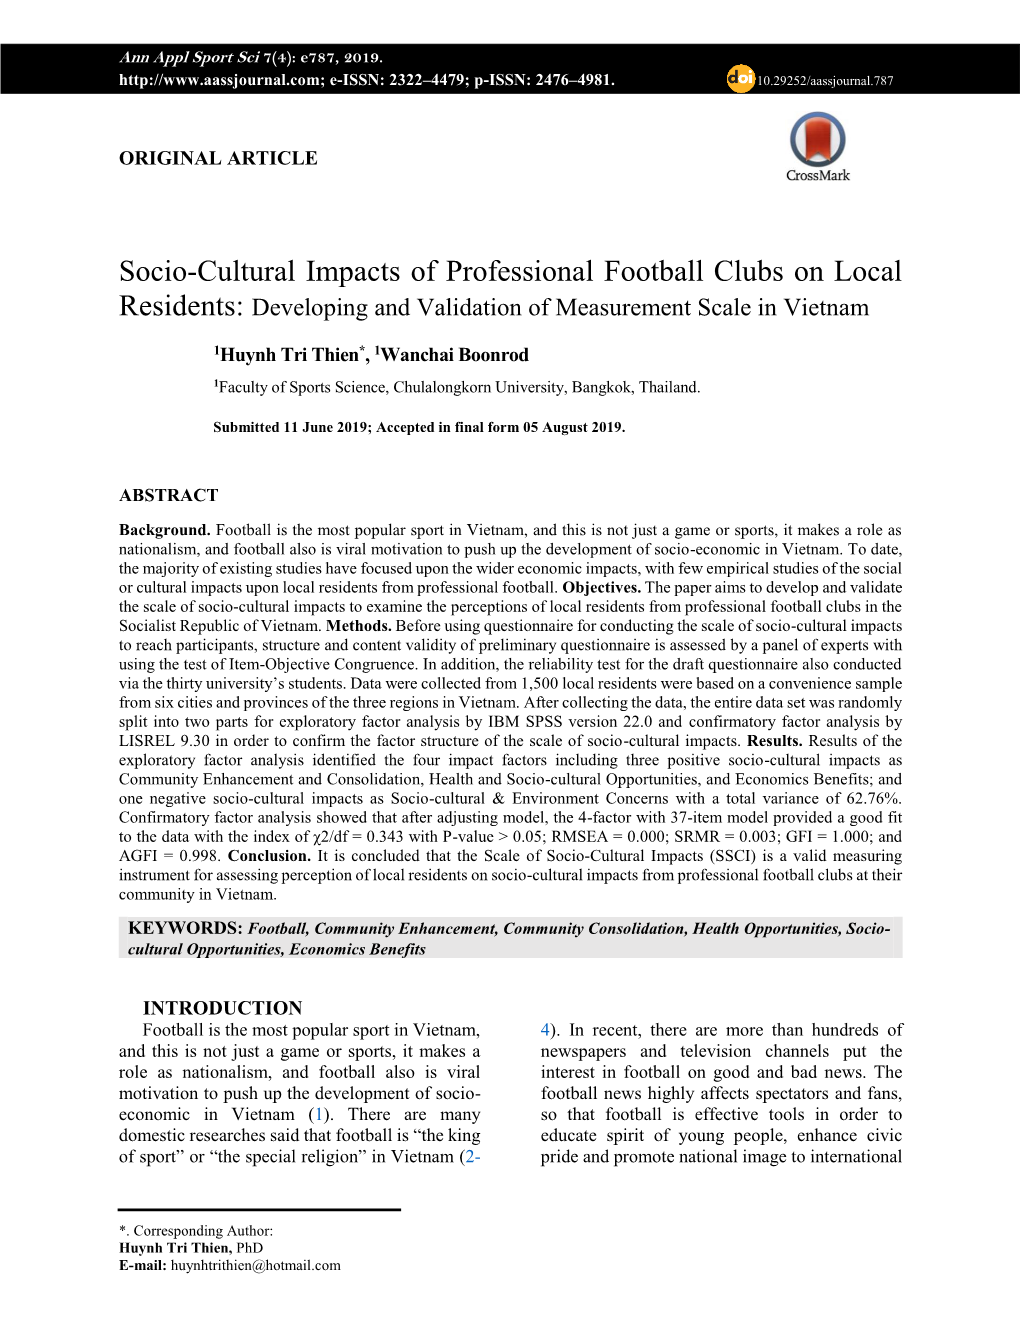 Socio-Cultural Impacts of Professional Football Clubs on Local Residents: Developing and Validation of Measurement Scale in Vietnam